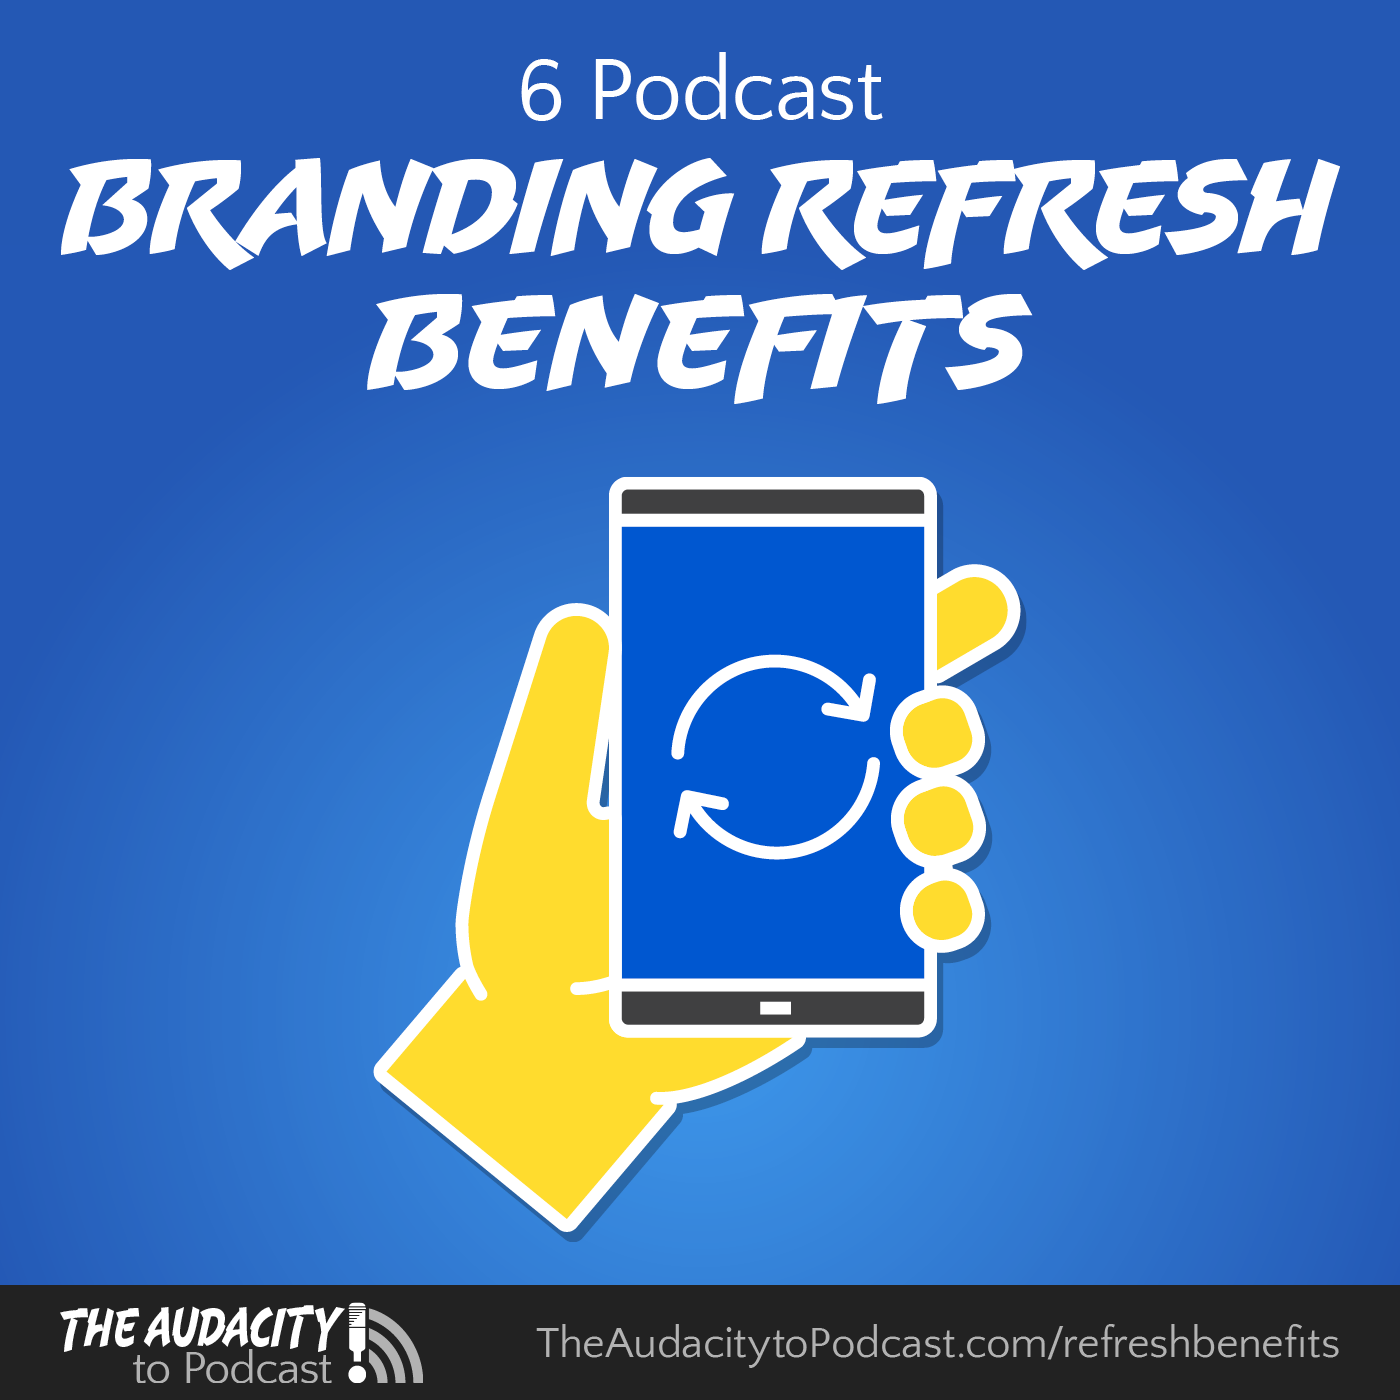 6 Benefits of a Podcast Branding Refresh